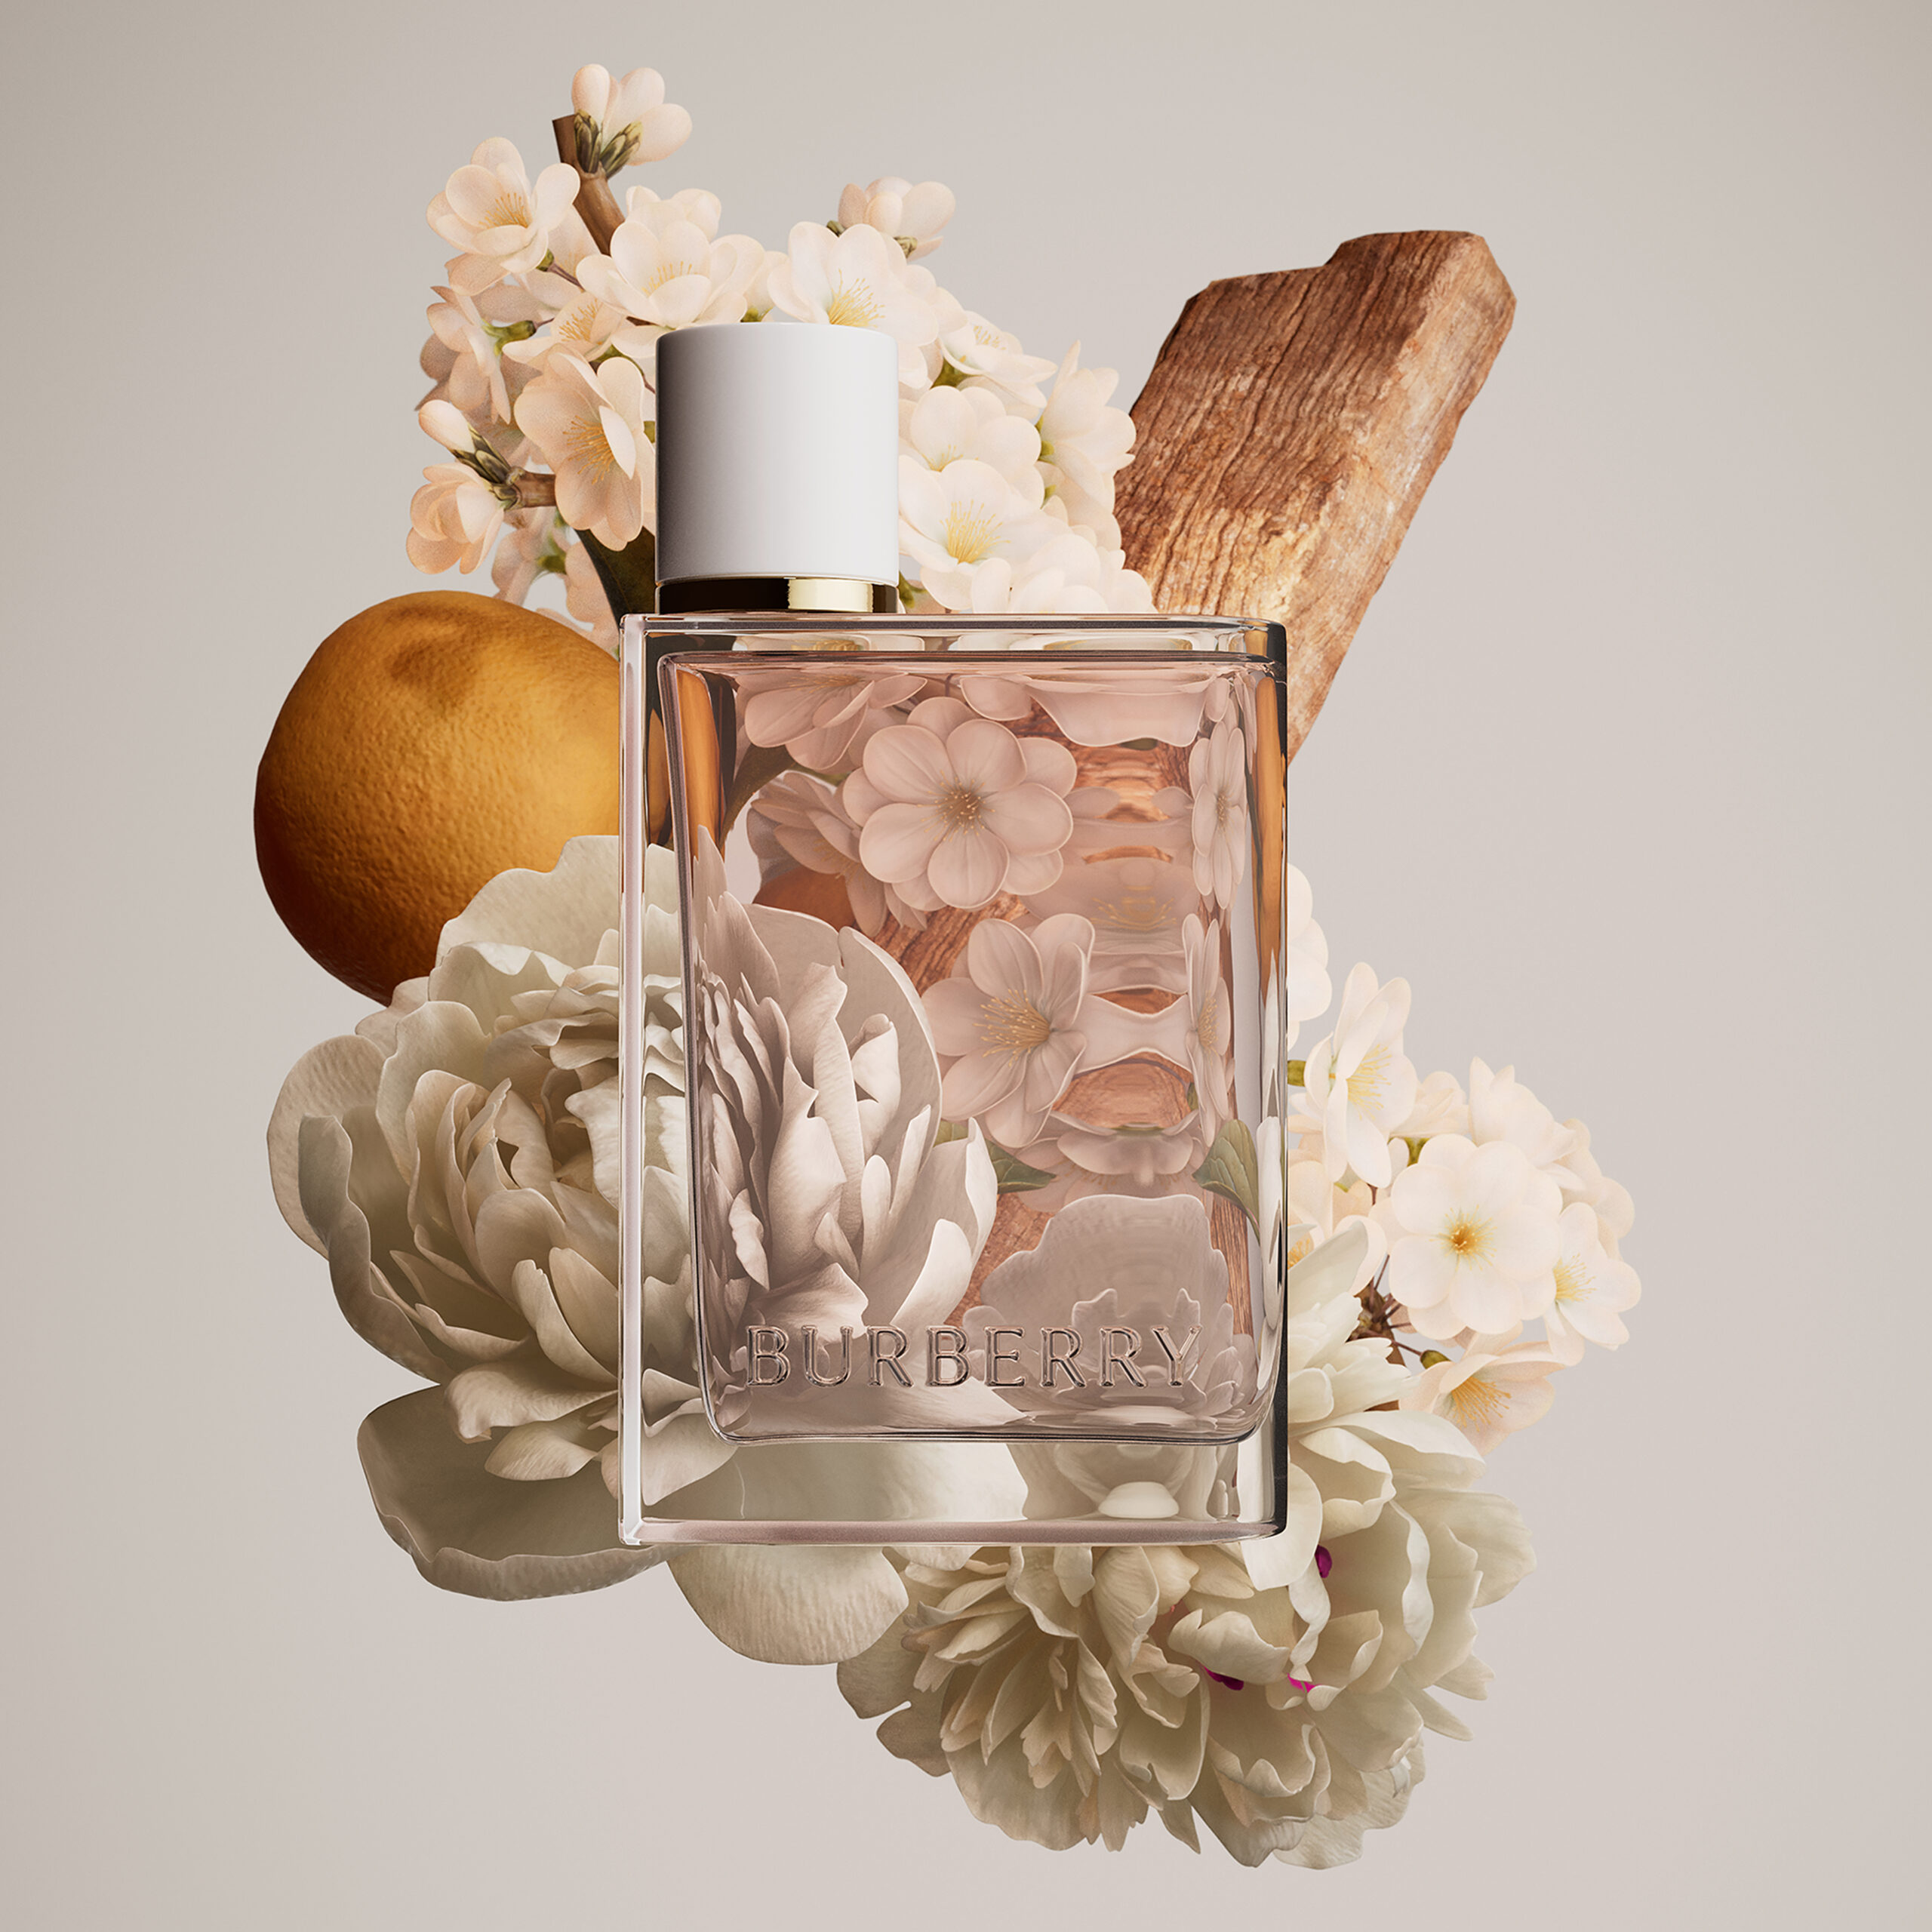 Flower Power: Five Floral Perfumes Guaranteed to Turn Heads